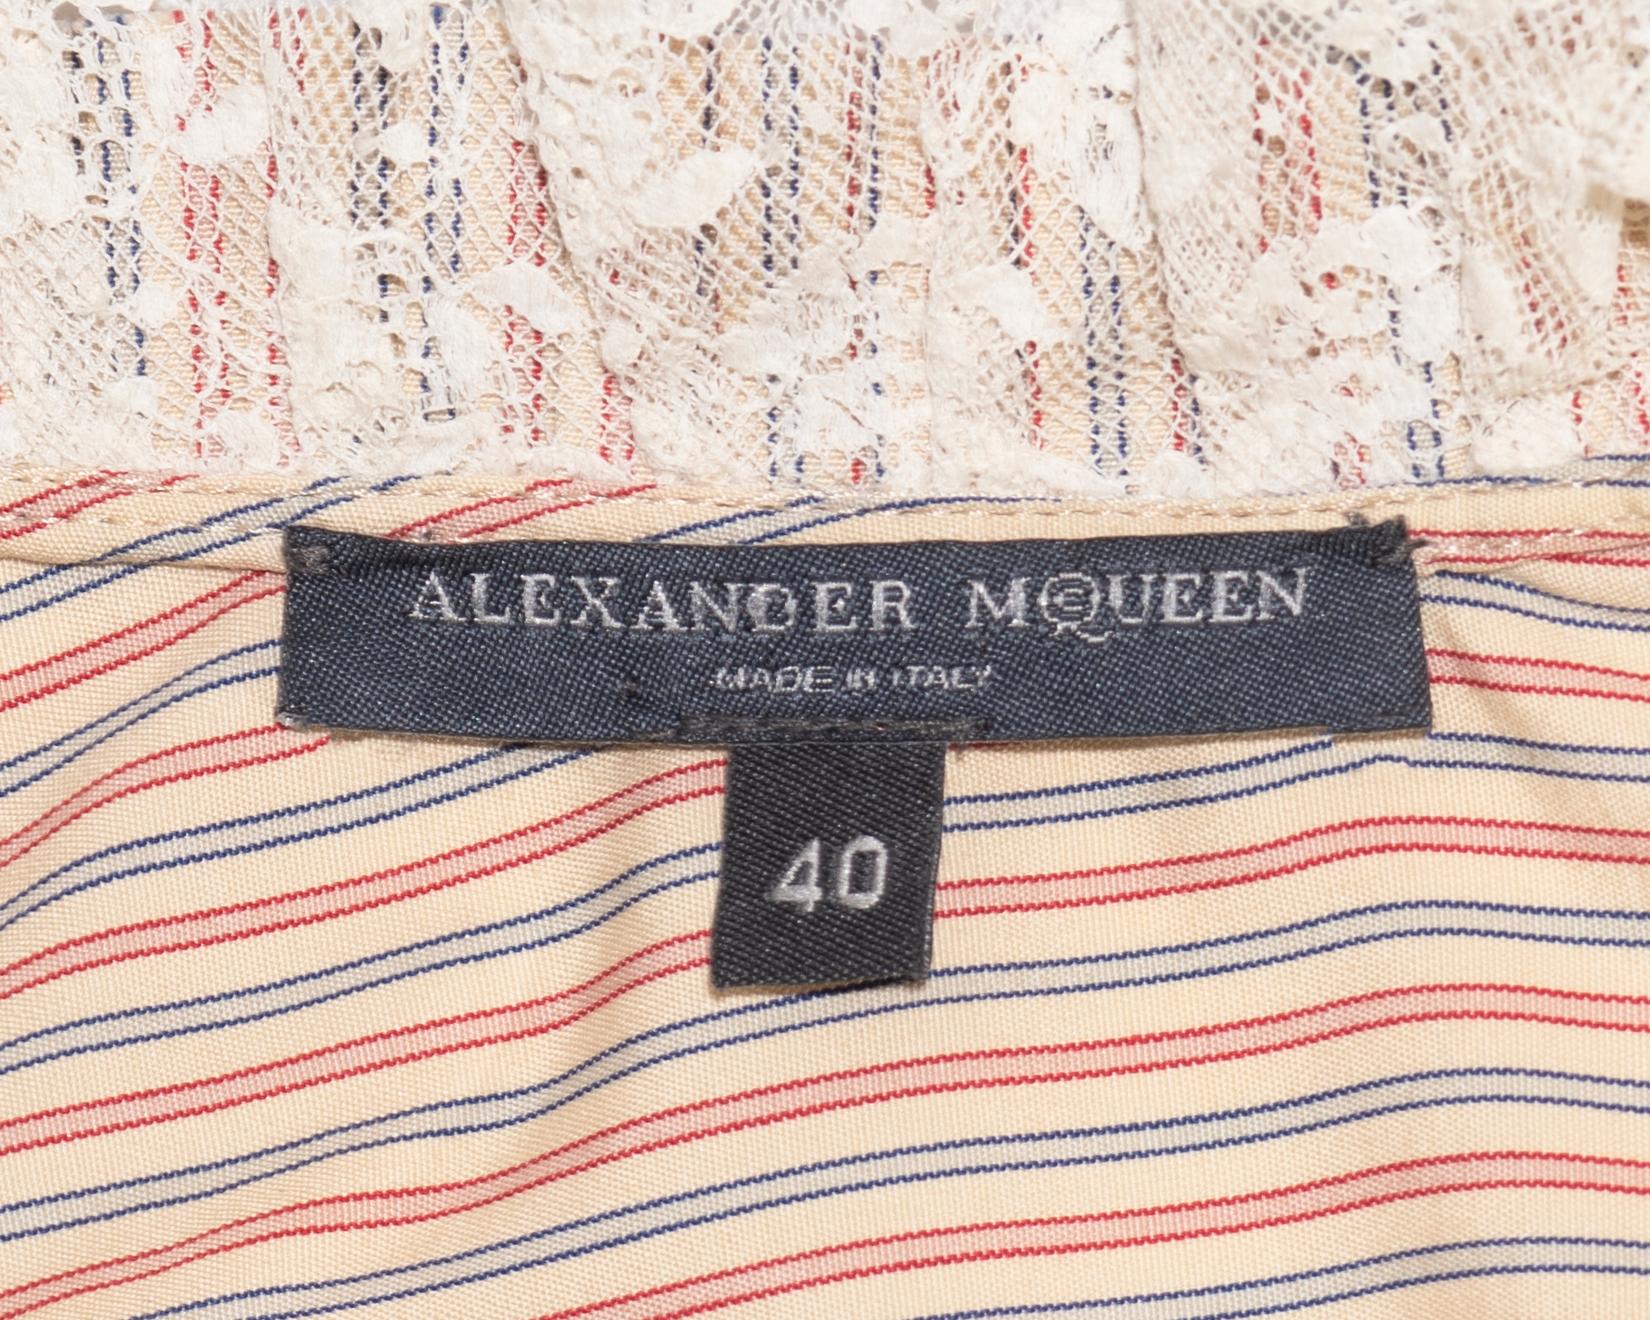 Alexander McQueen striped cotton and lace dress with pleated skirt, ss 2005 For Sale 5